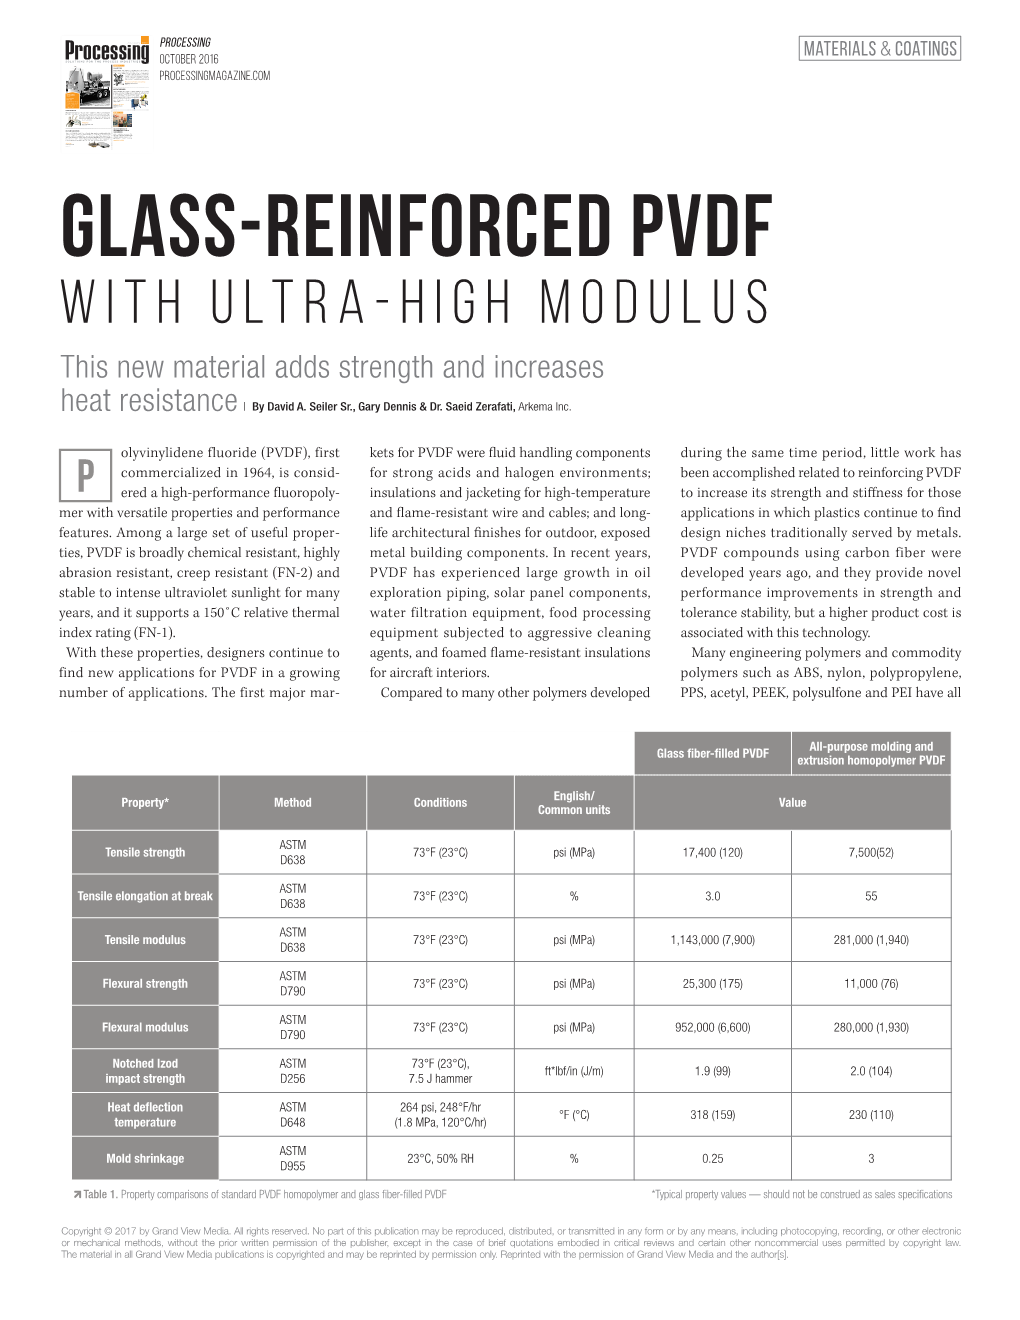 Glass-Reinforced PVDF with Ultra-High Modulus This New Material Adds Strength and Increases Heat Resistance | by David A